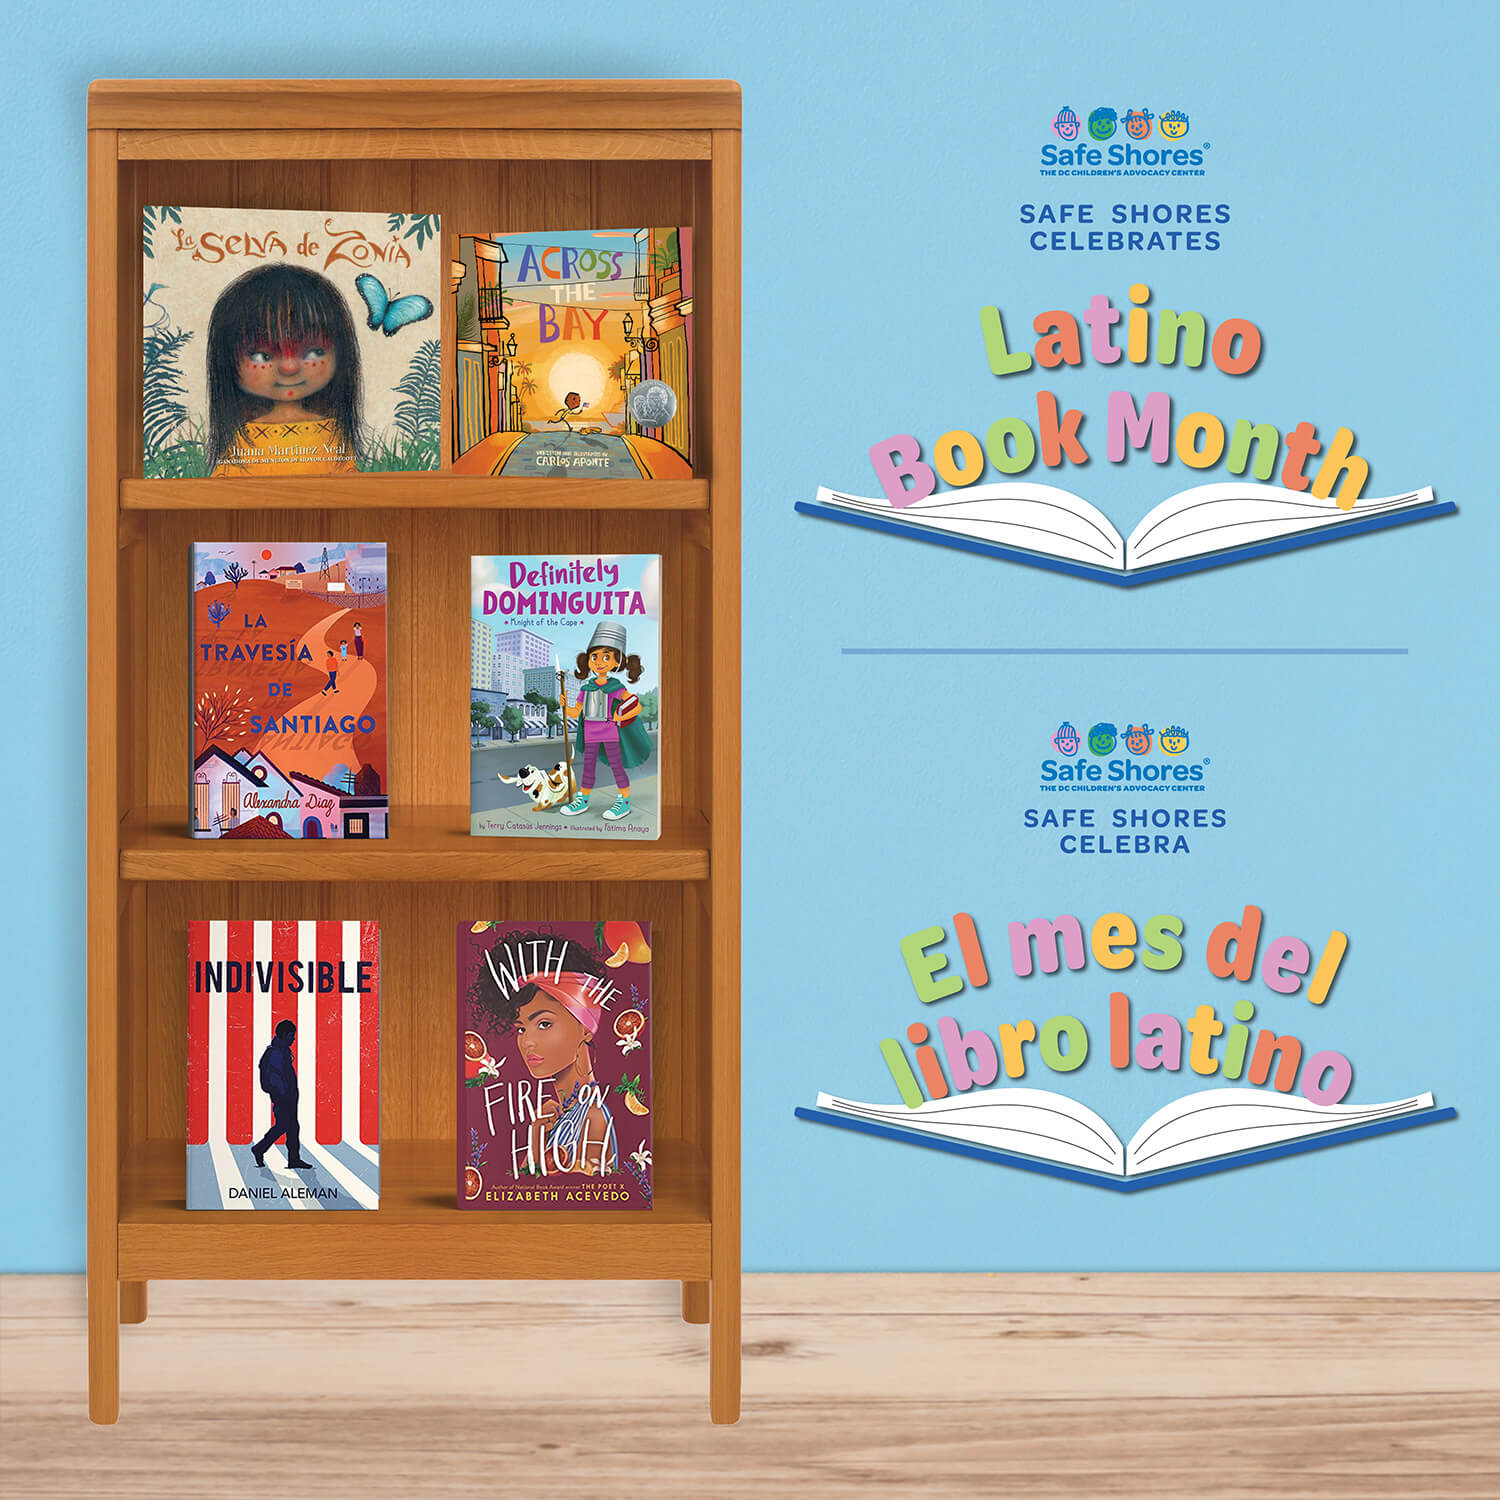 Image Reads: Safe Shores Celebrates Latino Book Month" And has numerous books on a shelf. 